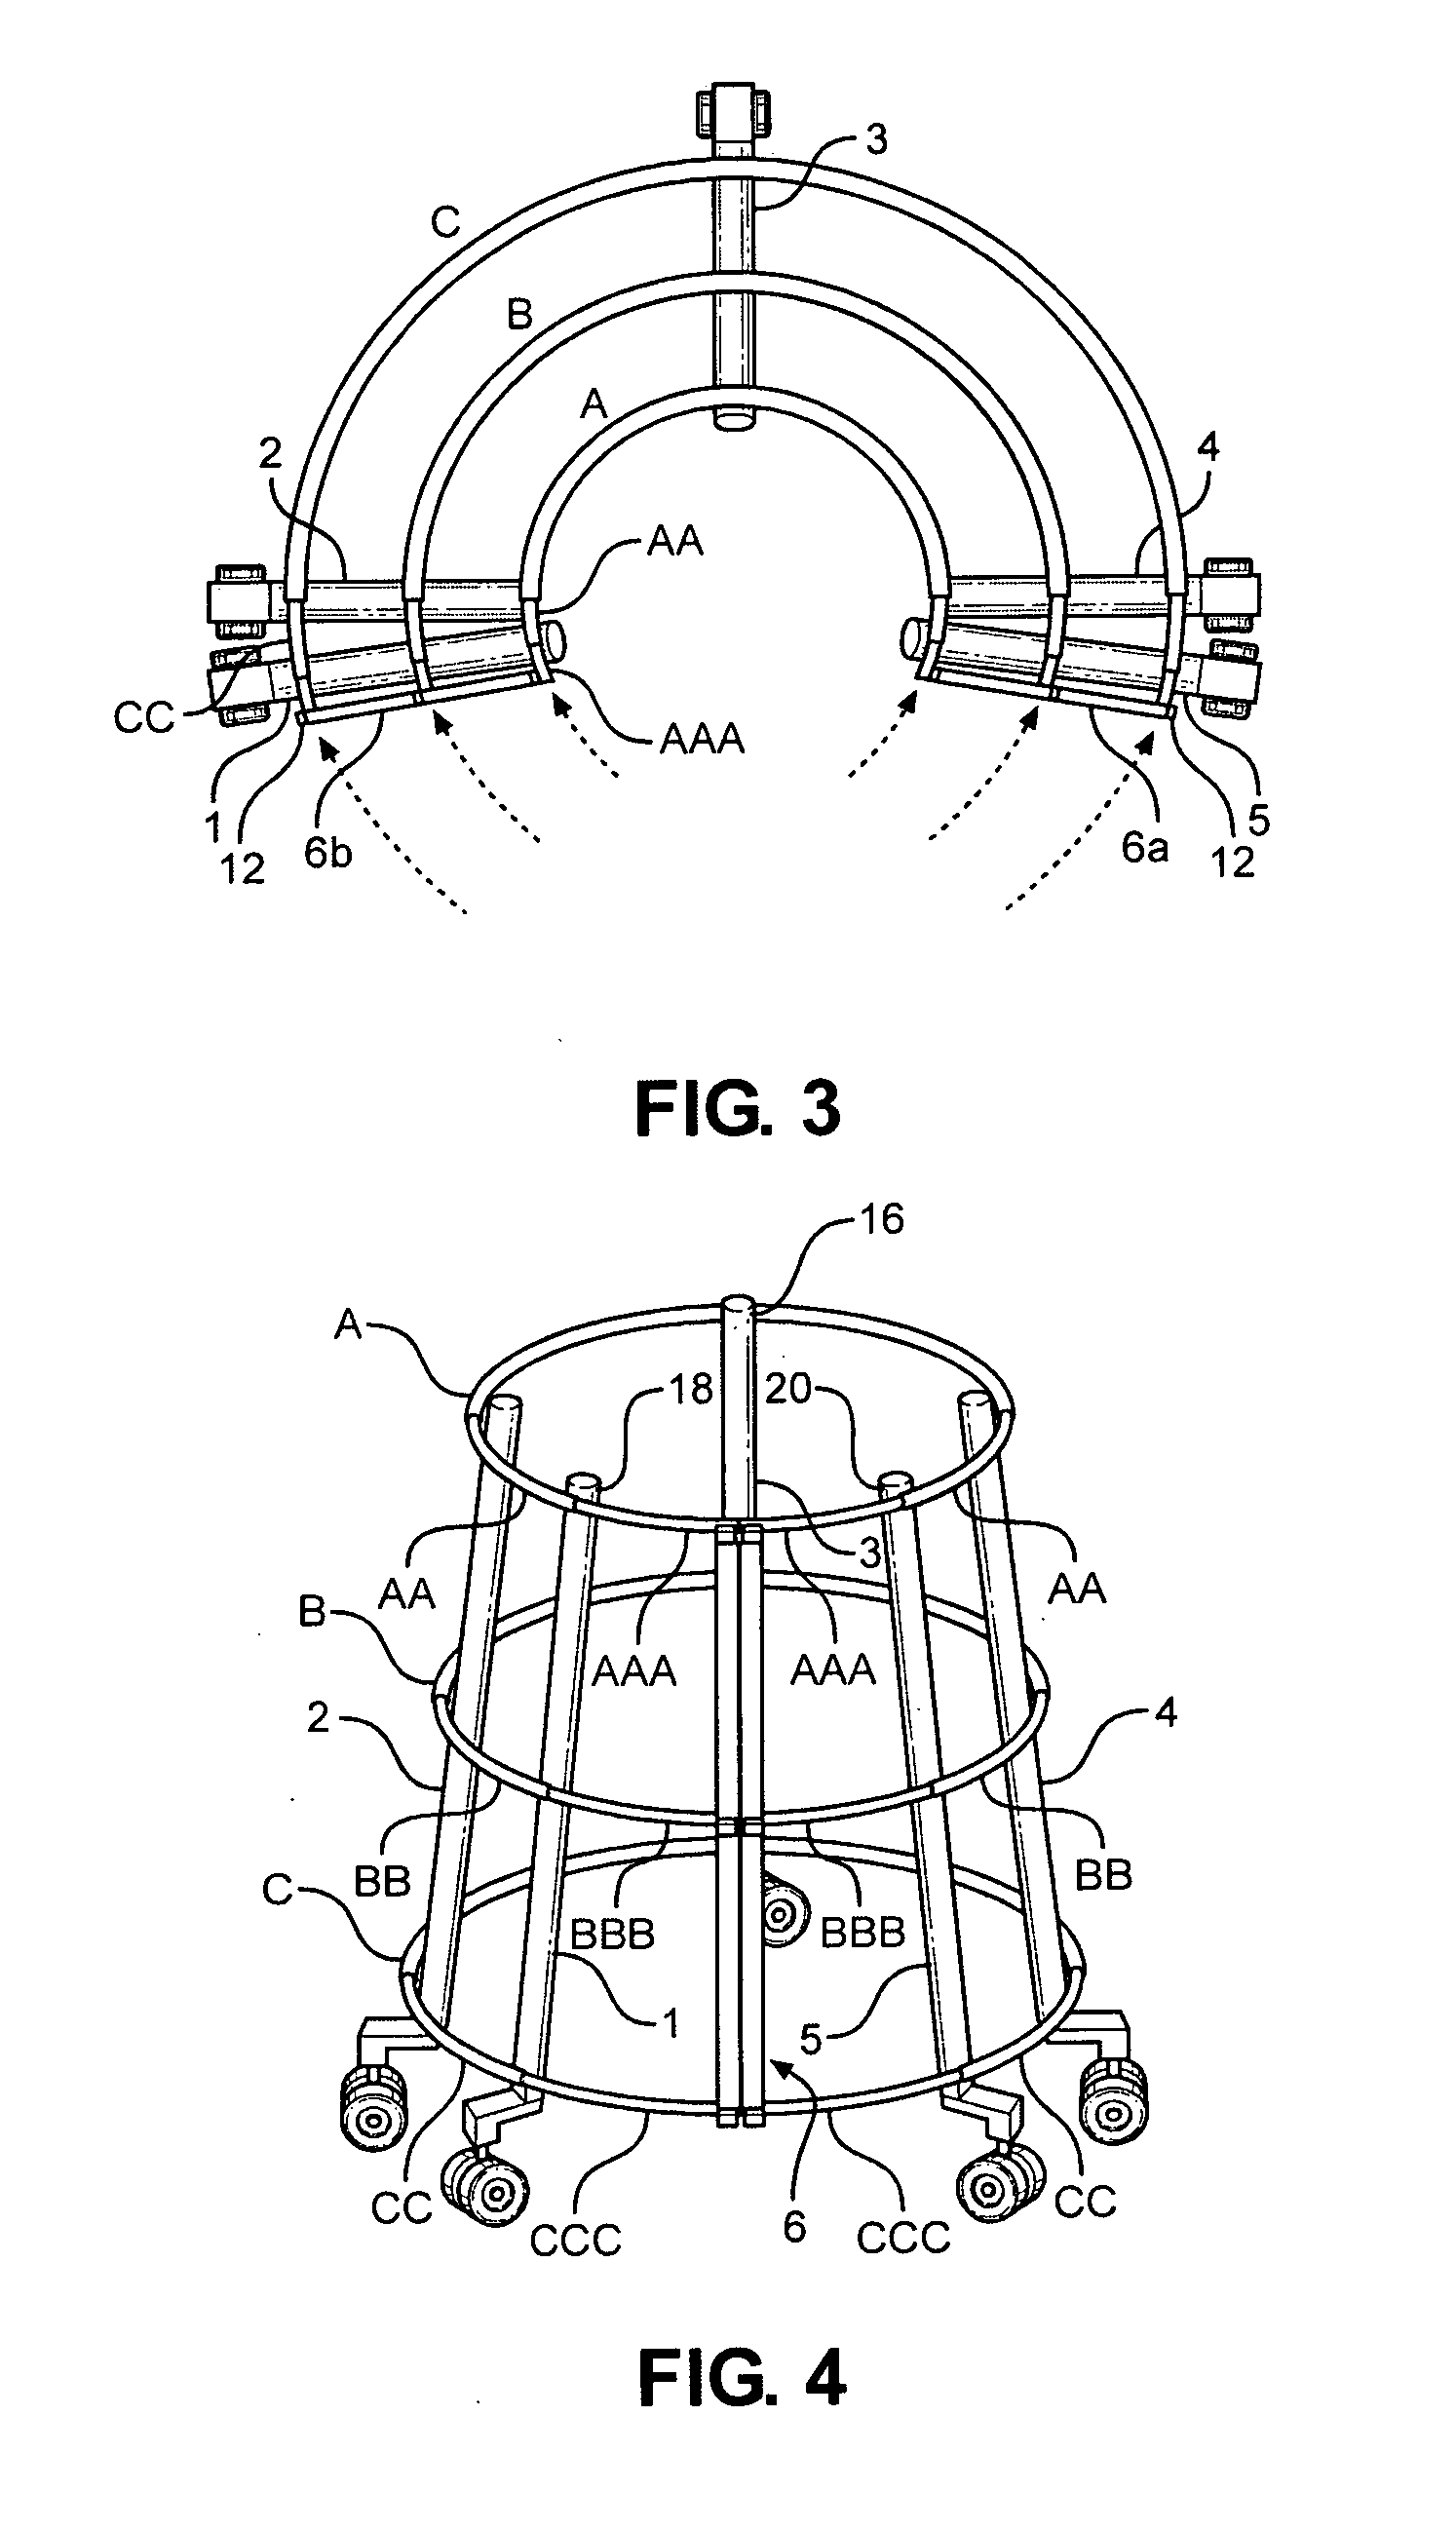 Therapeutic mobility assistive device